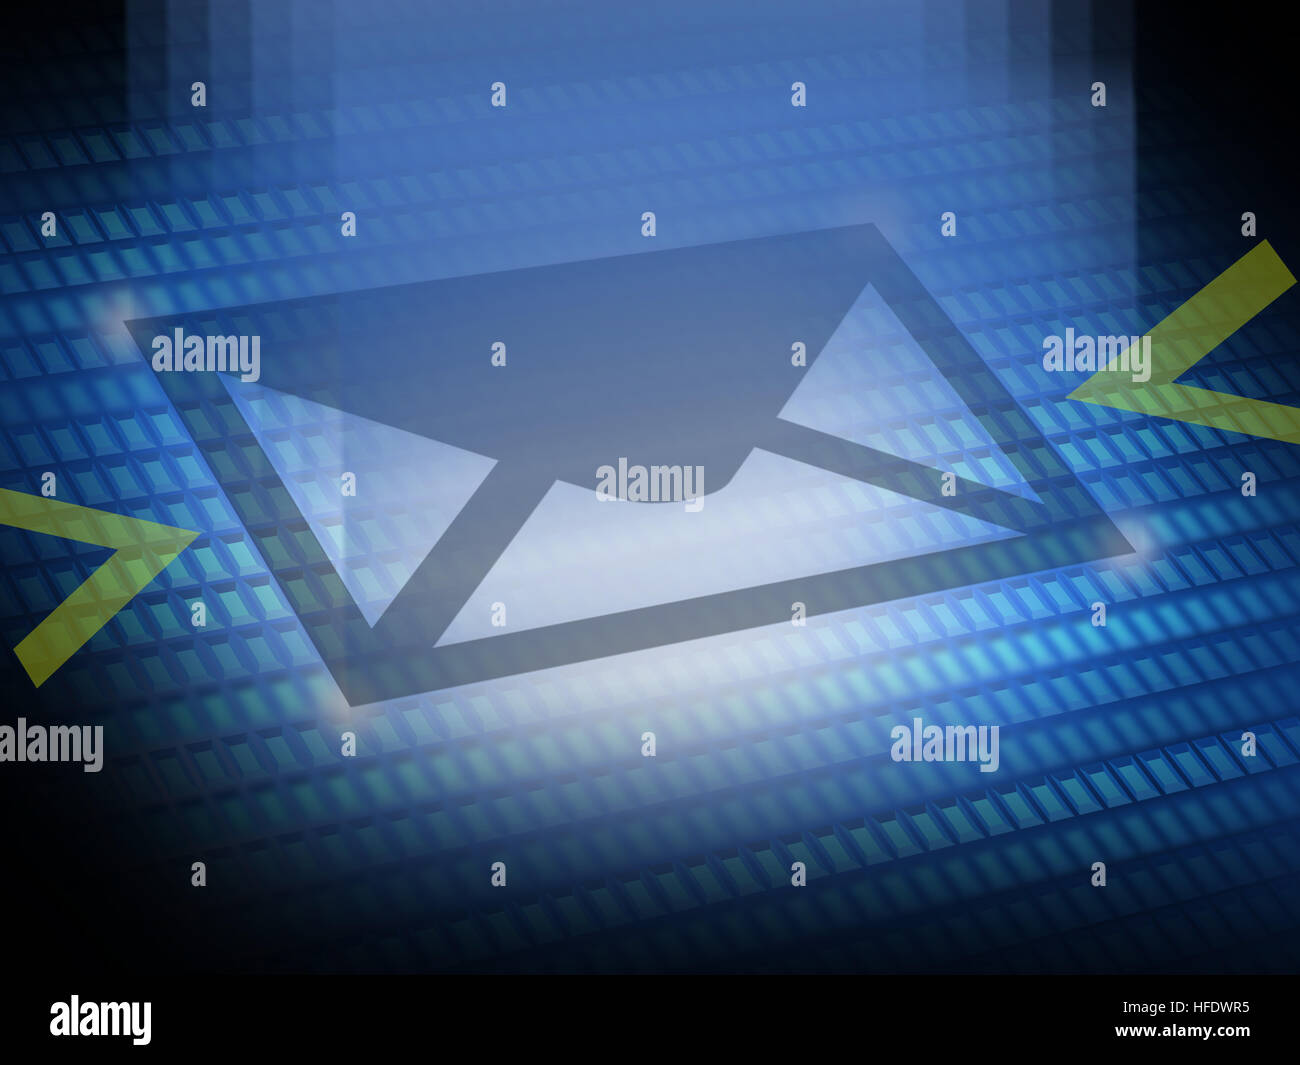 Send email icon digital image Stock Photo